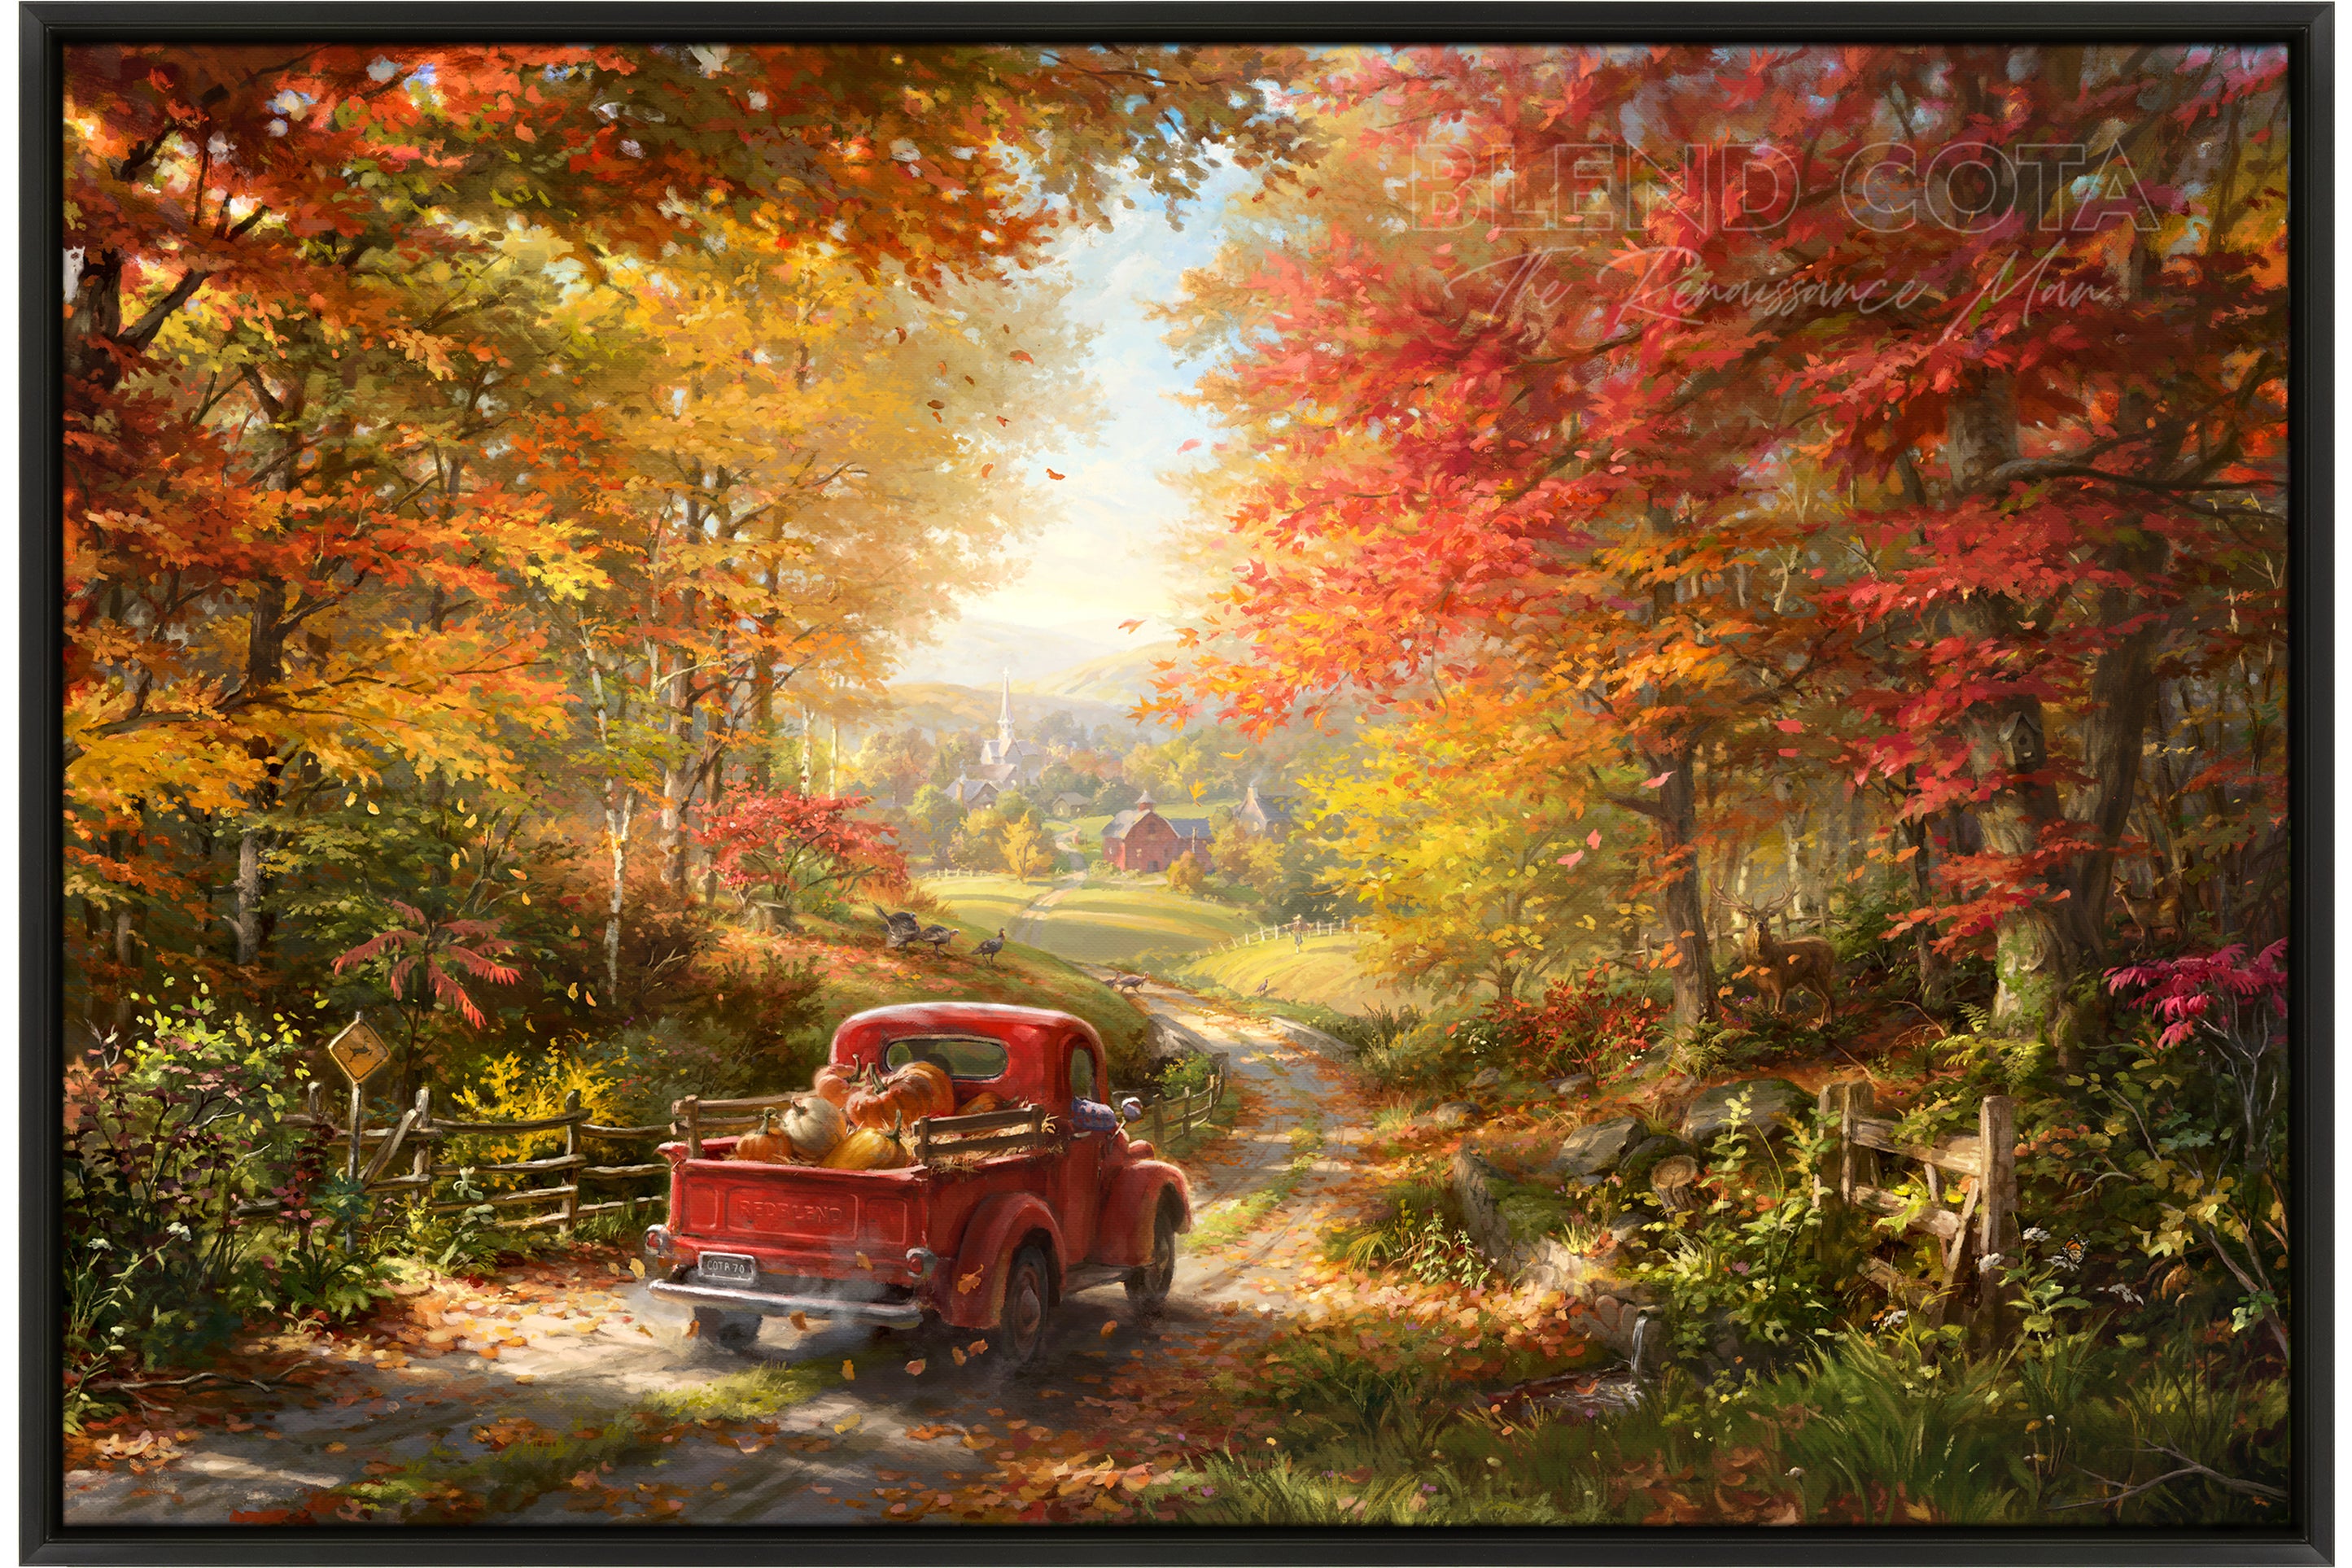 original oil painting of a fall road with red truck carrying pumpkins to farm in the country with red and orange leaves falling. 